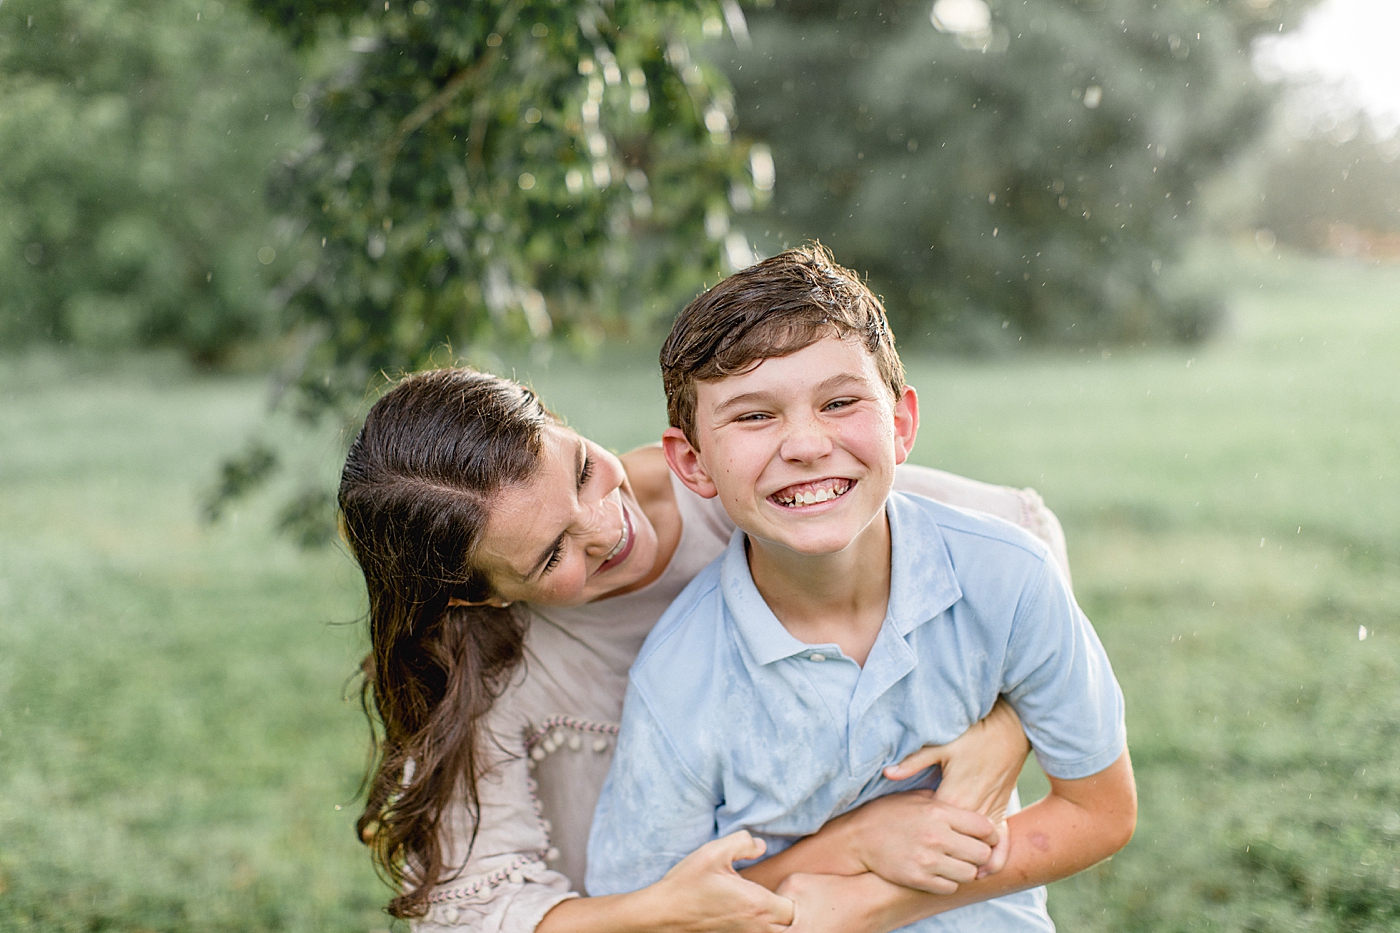 Mom hugging her son and playing in the rain during family photos with Brittany Elise Photography.